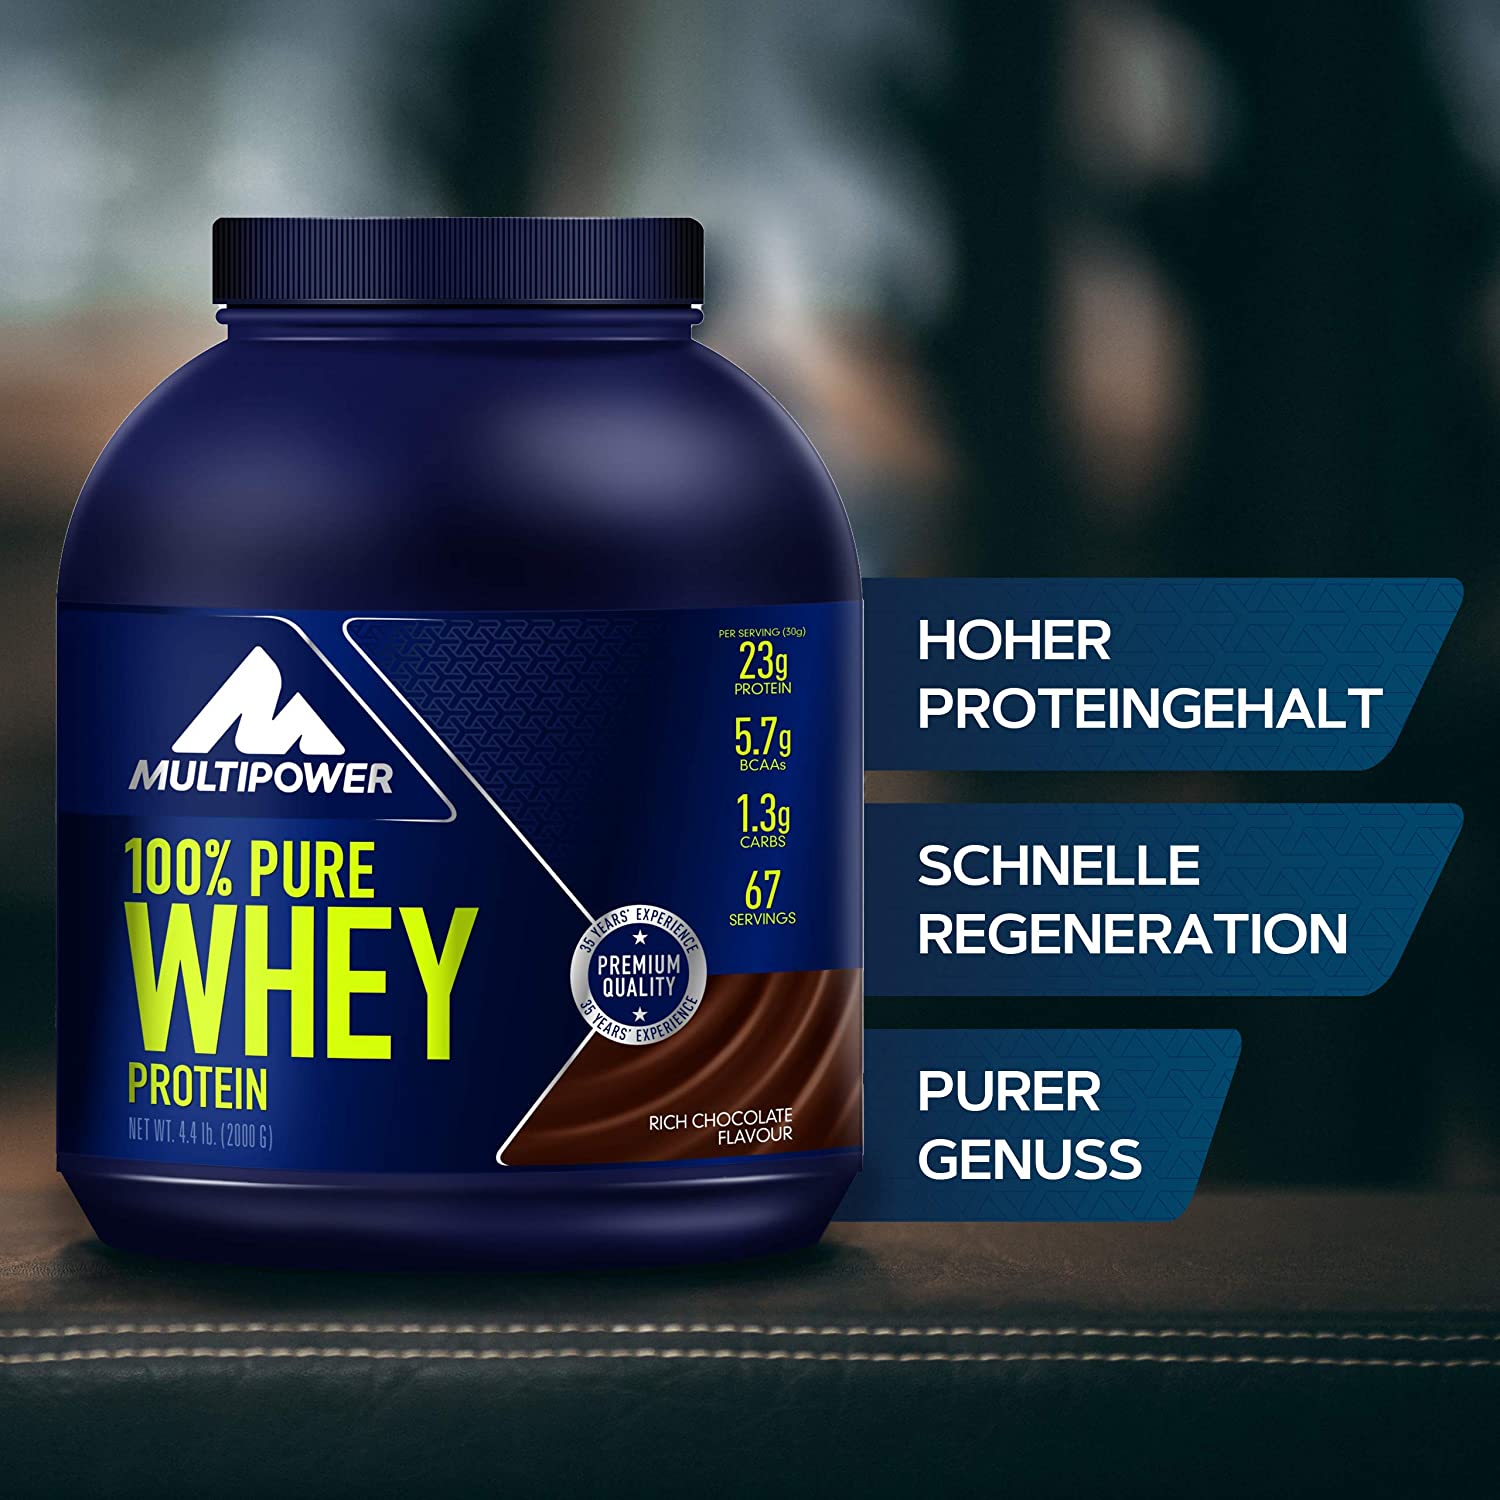 Multipower 100% Pure Whey Protein Bulletpoints